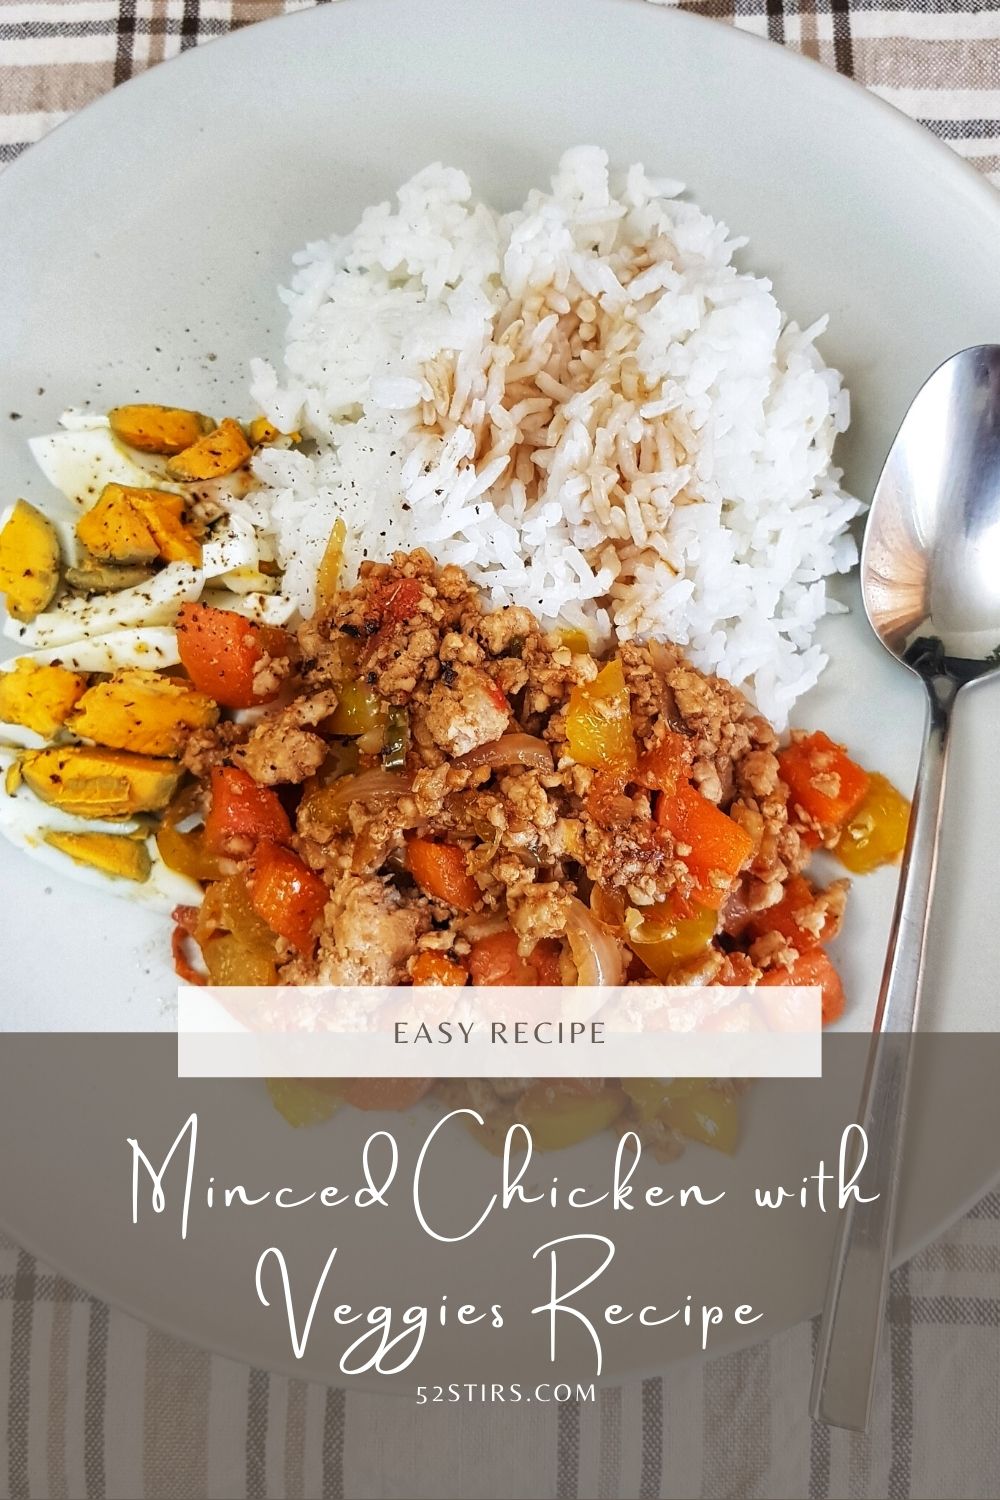 Easy Minced Chicken with Veggies Recipe - 52stirs.com